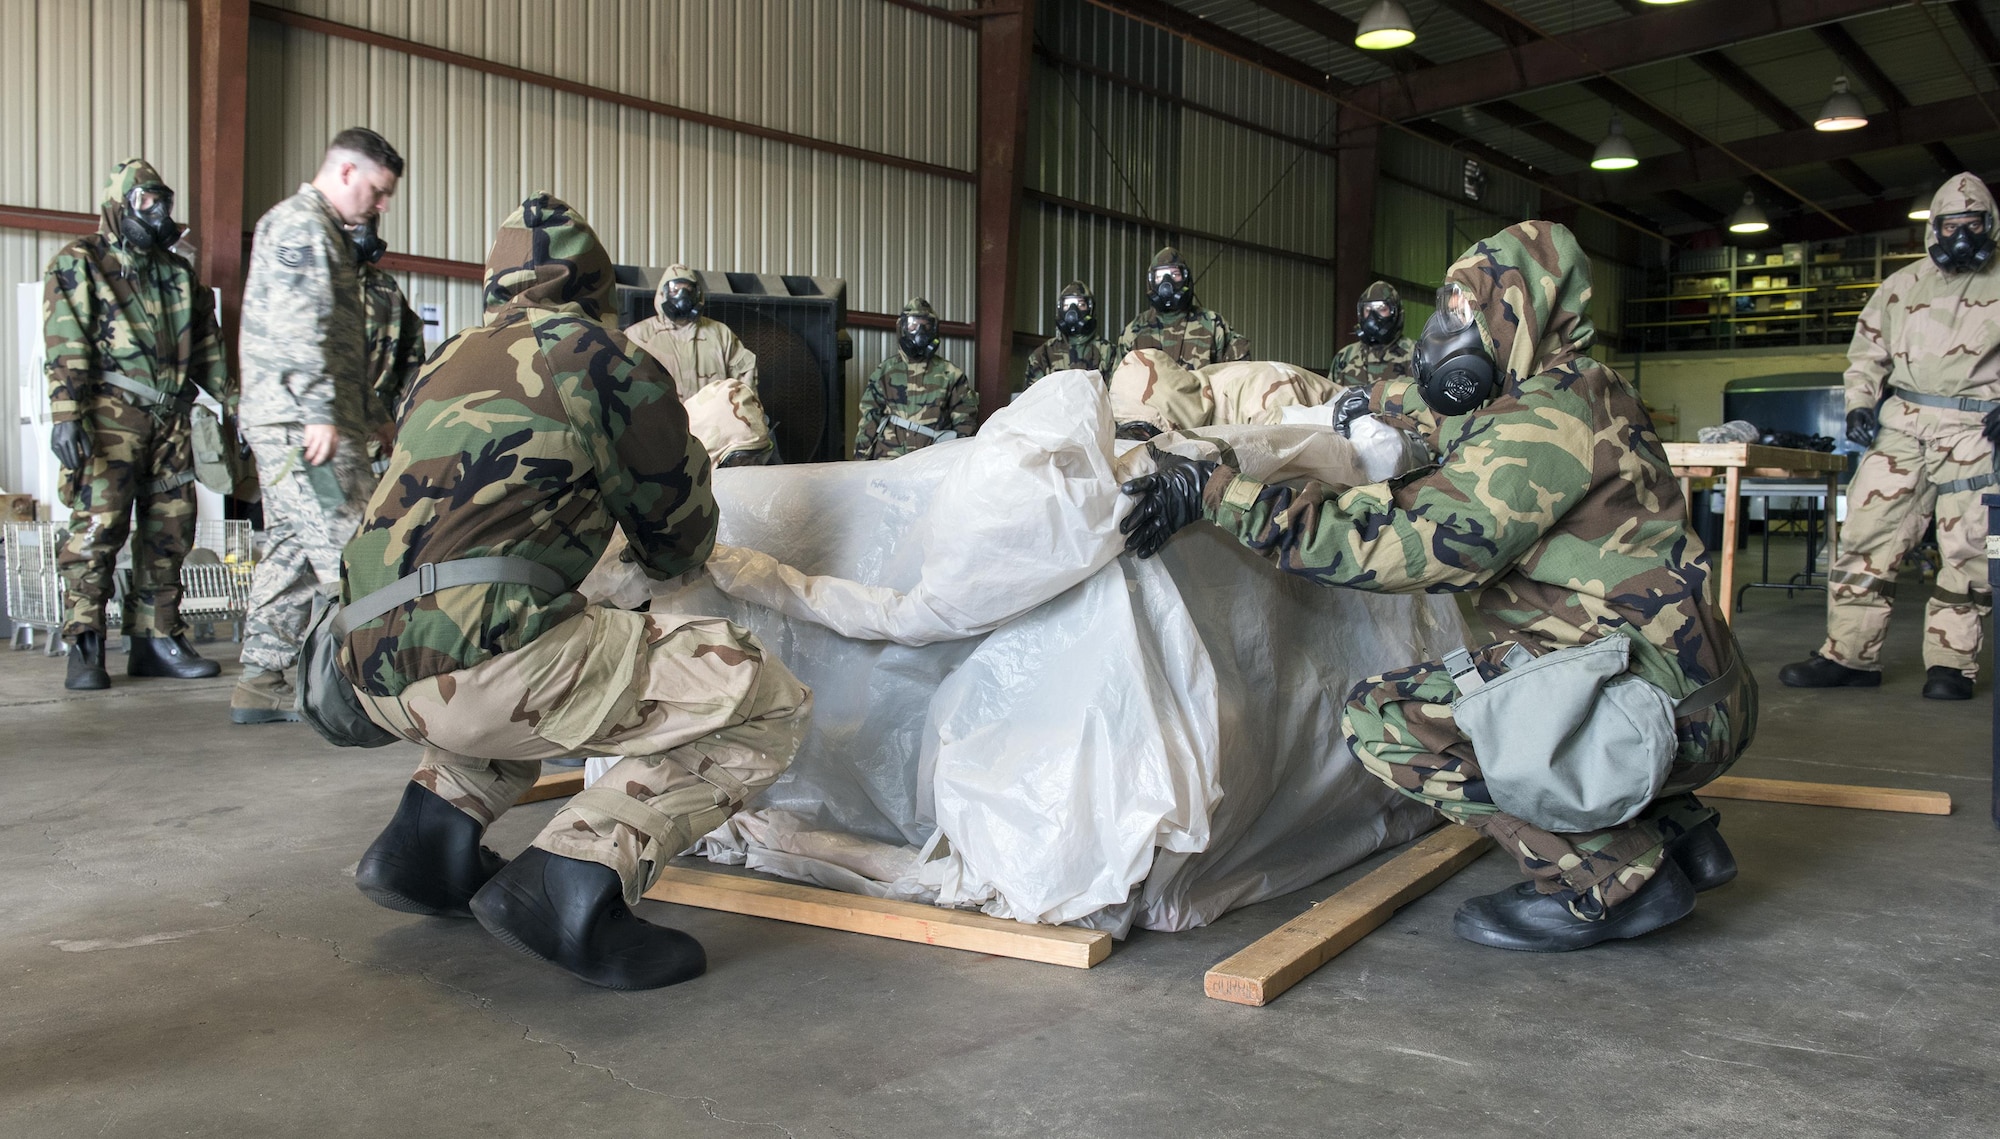 U. S. Air Force Airmen learn how to protect an “asset” during a chemical, biological, radiological and nuclear defense survival skills training course on Travis Air Force Base, Calif., Sep. 21, 2017. CBRN defenses are protective measures taken in situations in which chemical, biological, radiological or nuclear warfare (including terrorism) hazards may be present. CBRN defense consists of CBRN passive protection, contamination avoidance and CBRN mitigation. (U.S. Air Force photo by Heide Couch)